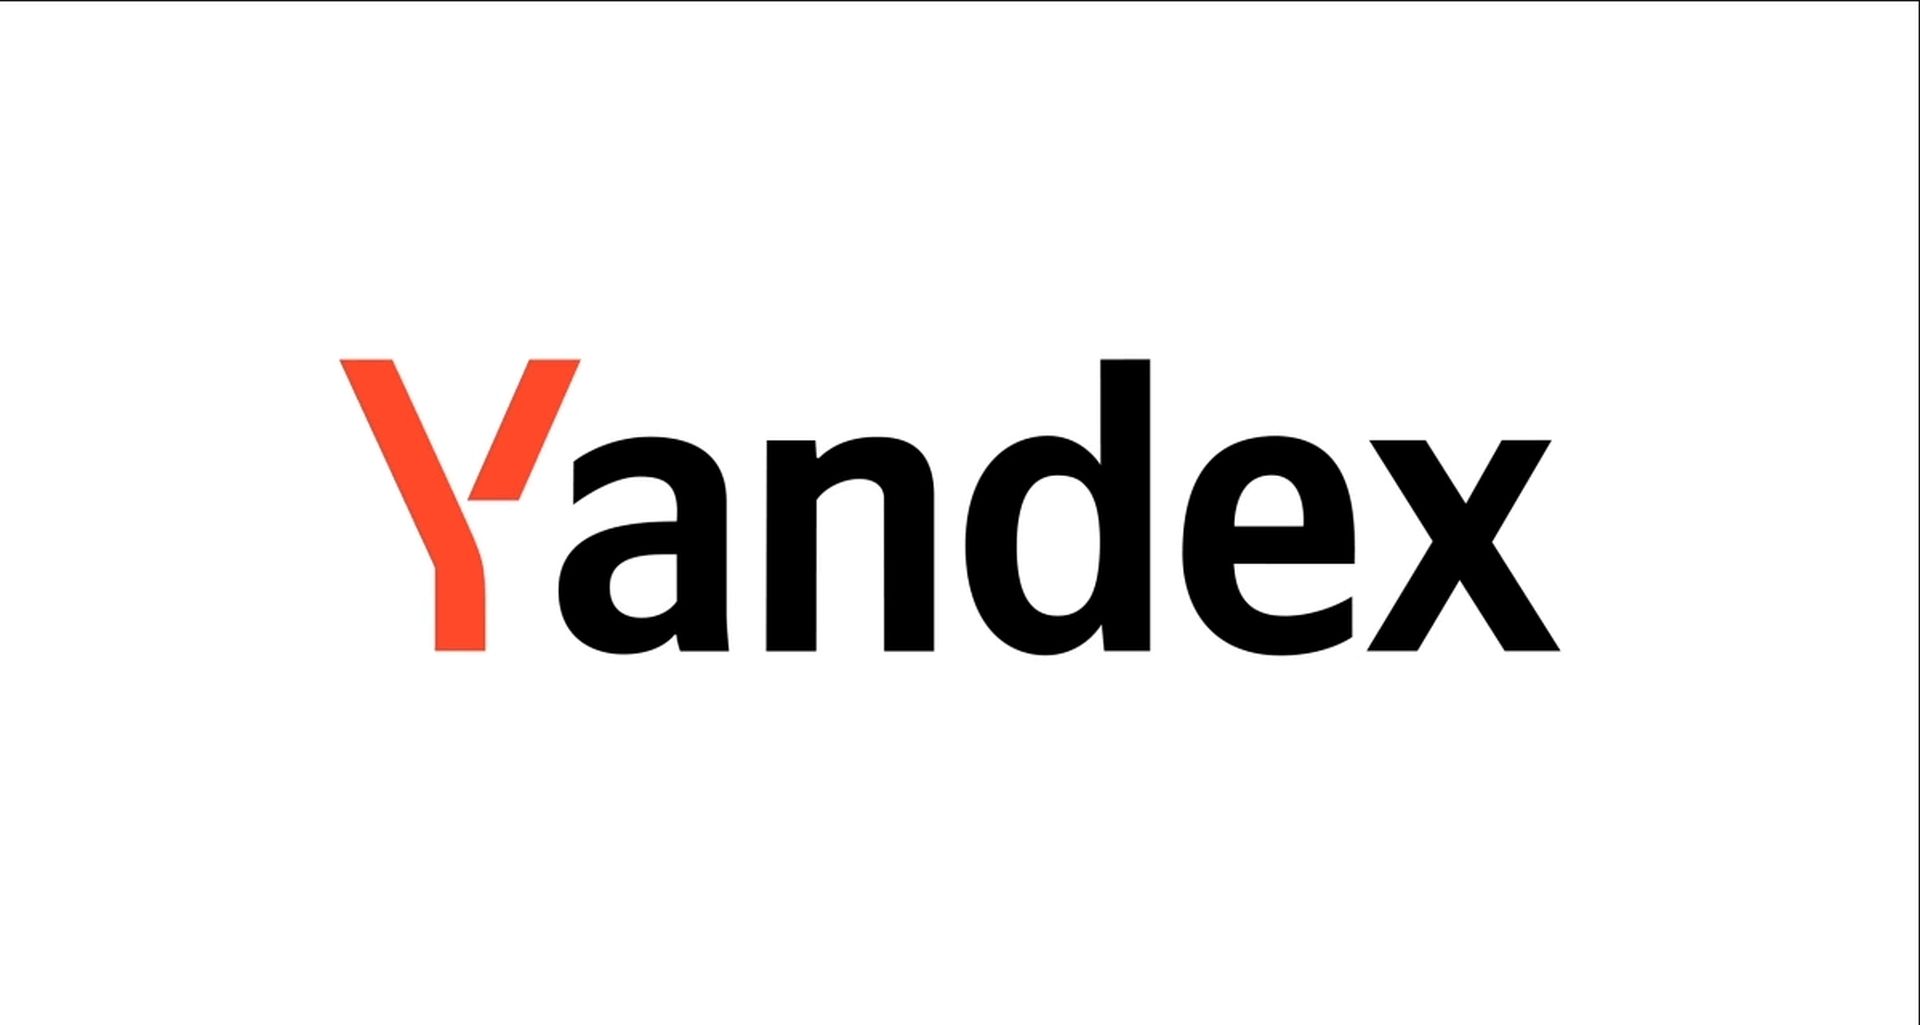 Yandex NV is out of Russia after a .2 billion deal